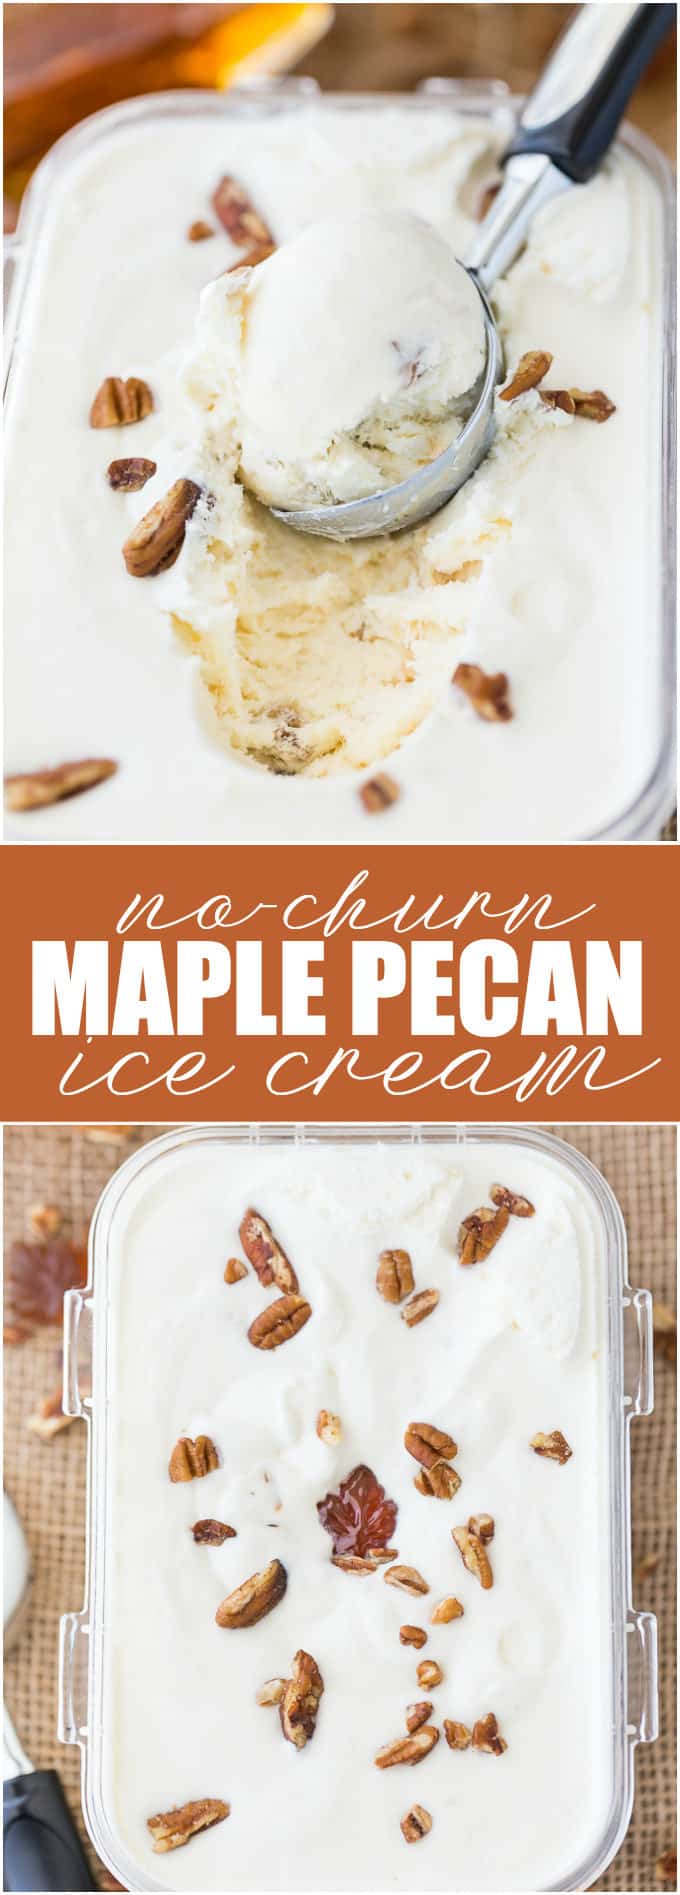 No-Churn Maple Pecan Ice Cream - Creamy, sweet with a little bit of crunch, you'll love the flavour the maple syrup adds to this ice cream recipe. 